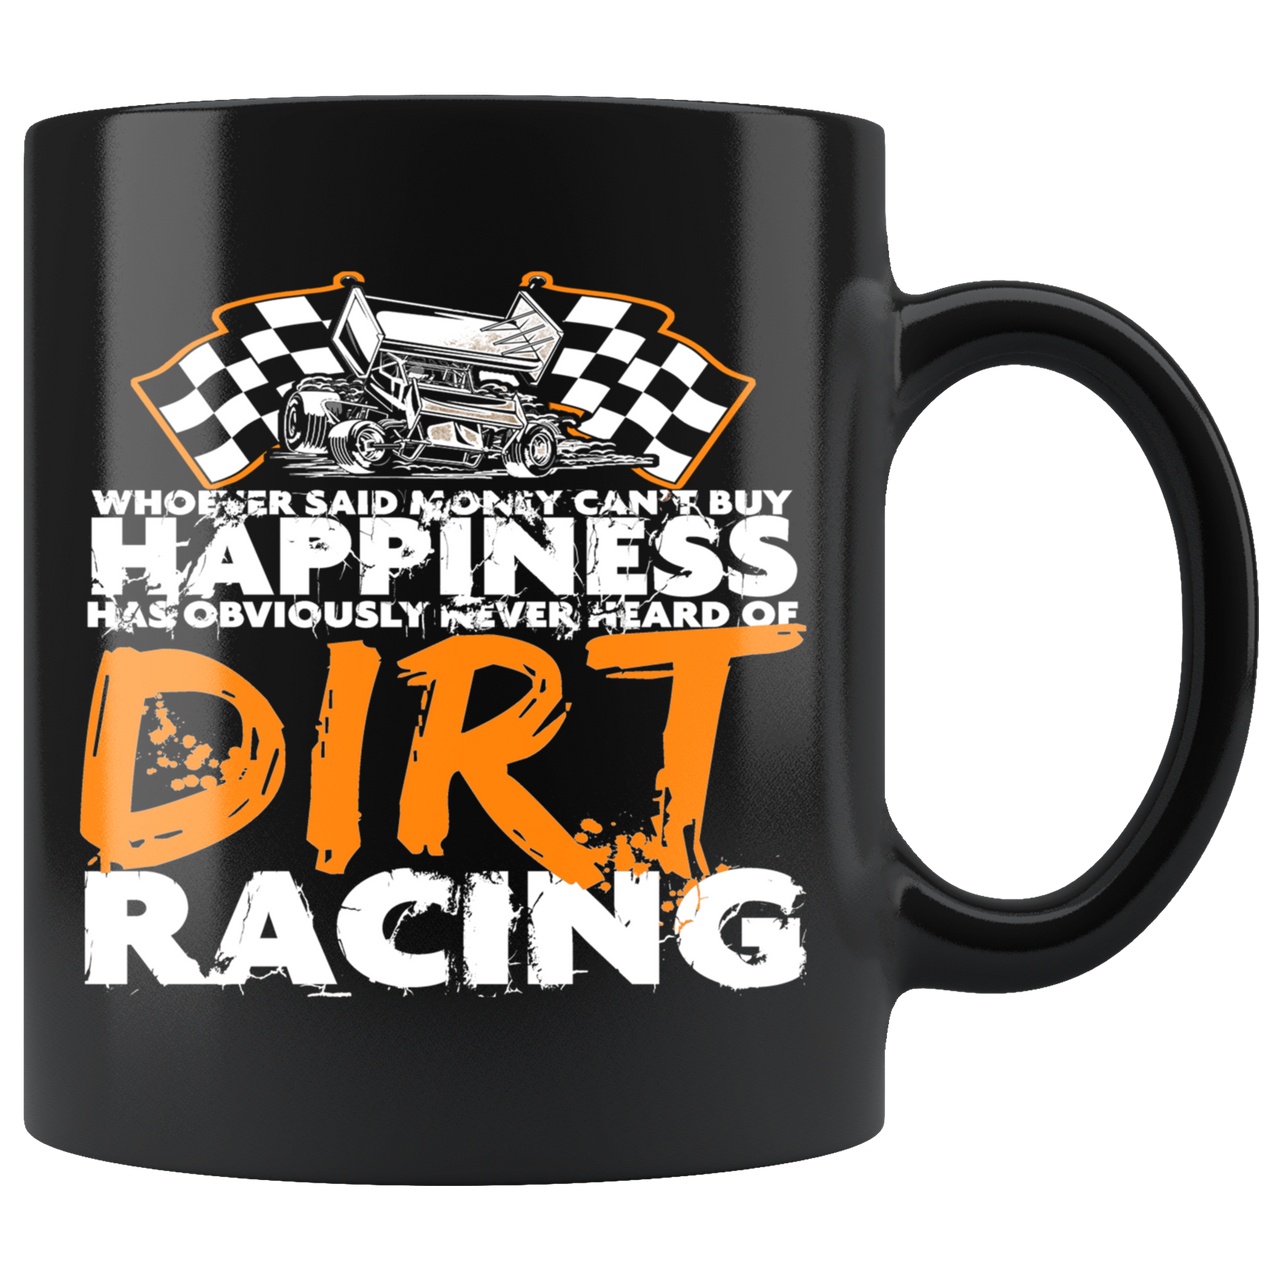 Whoever Said Money Can't Buy Happiness Never Hear Of Dirt Racing Sprint Car Mug!